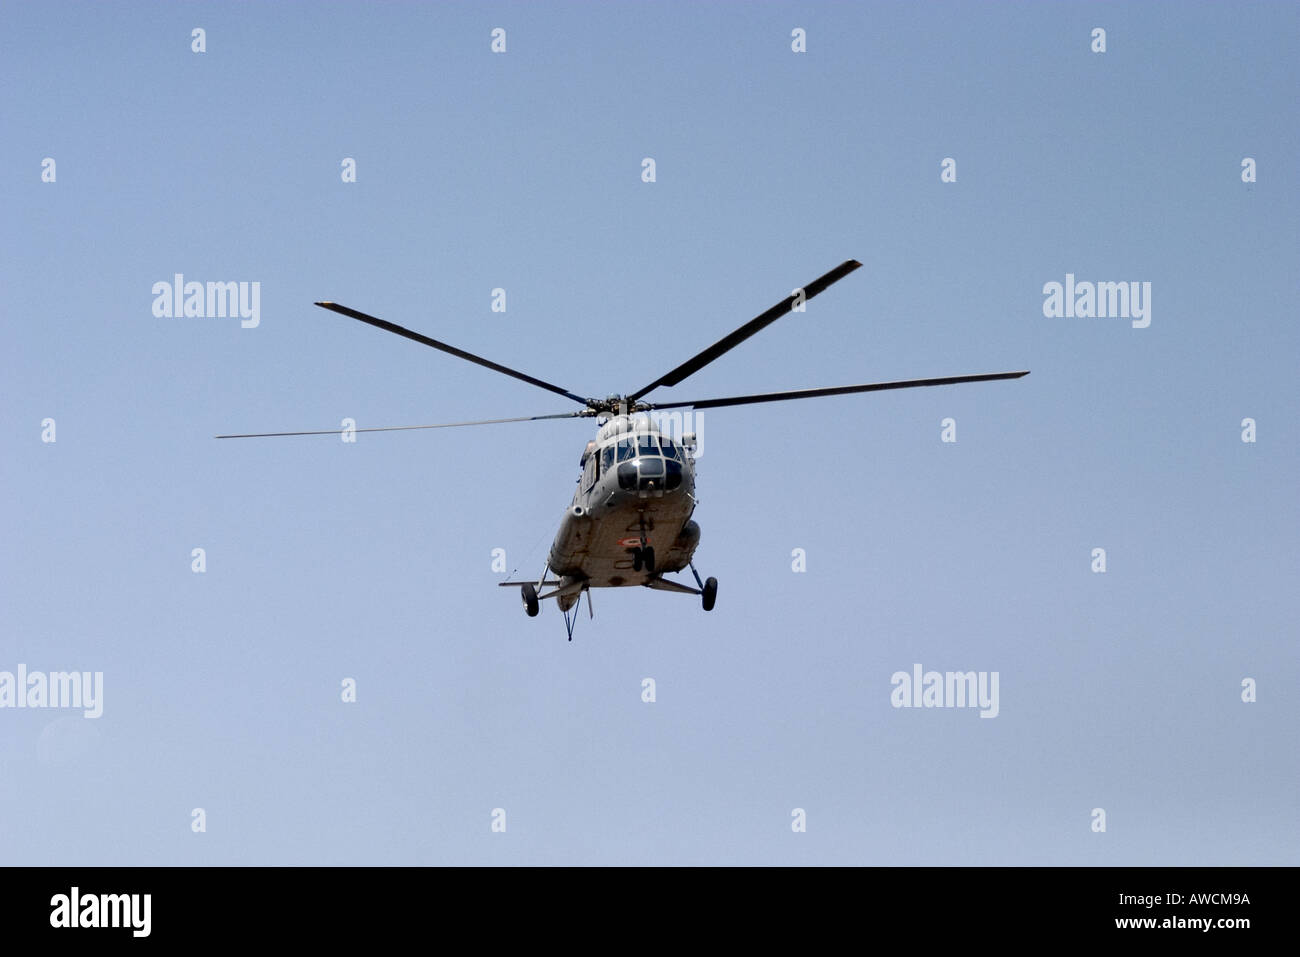 The Mil Mi 17 Russian helicopter Stock Photo